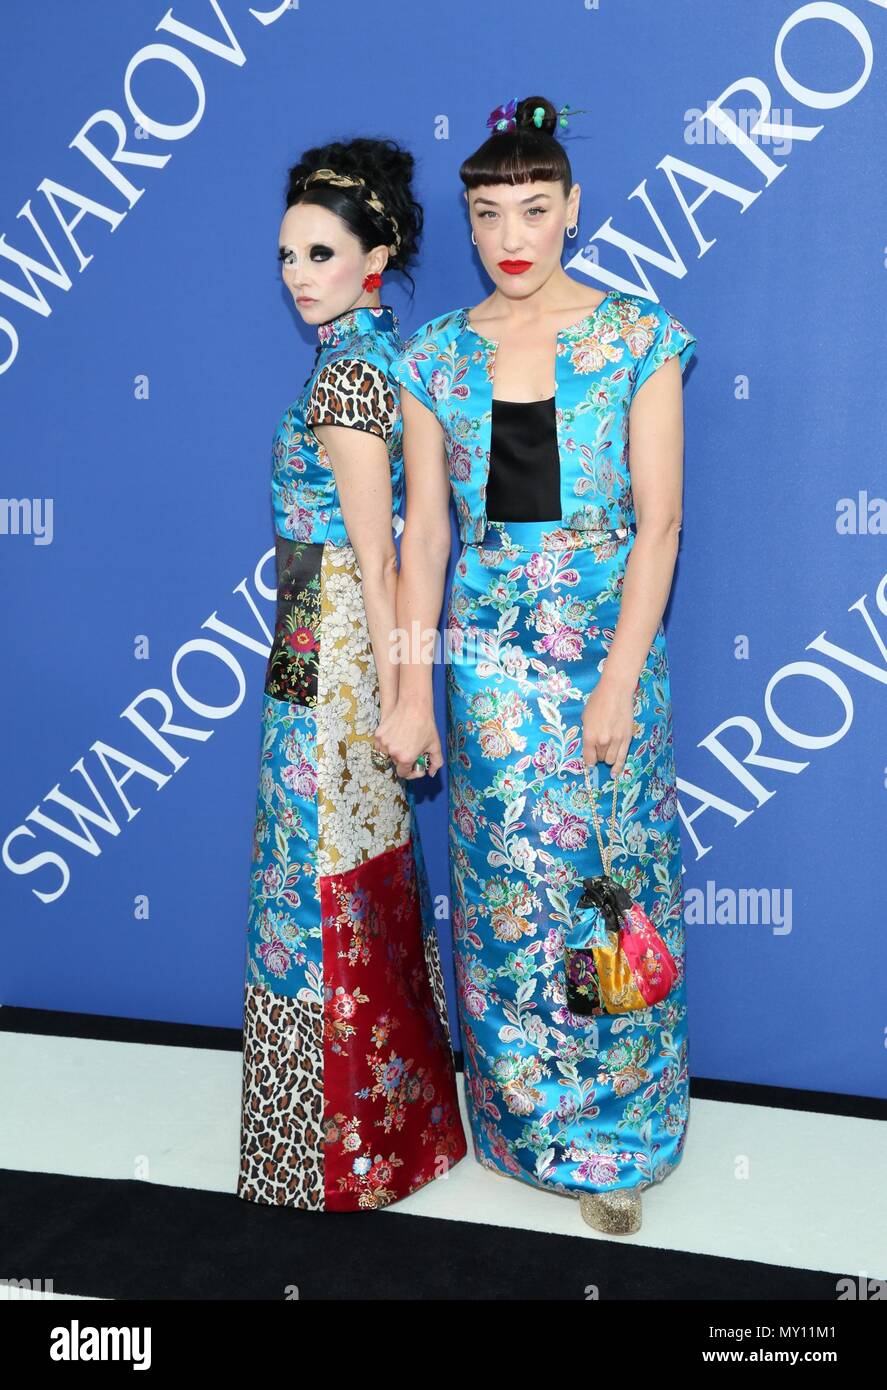 Brooklyn, NY, USA. 4th June, 2018. Stacey Bendet, Mia Moret at arrivals for 2018 CFDA Fashion Awards, Brooklyn Museum, Brooklyn, NY June 4, 2018. Credit: Andres Otero/Everett Collection/Alamy Live News Stock Photo